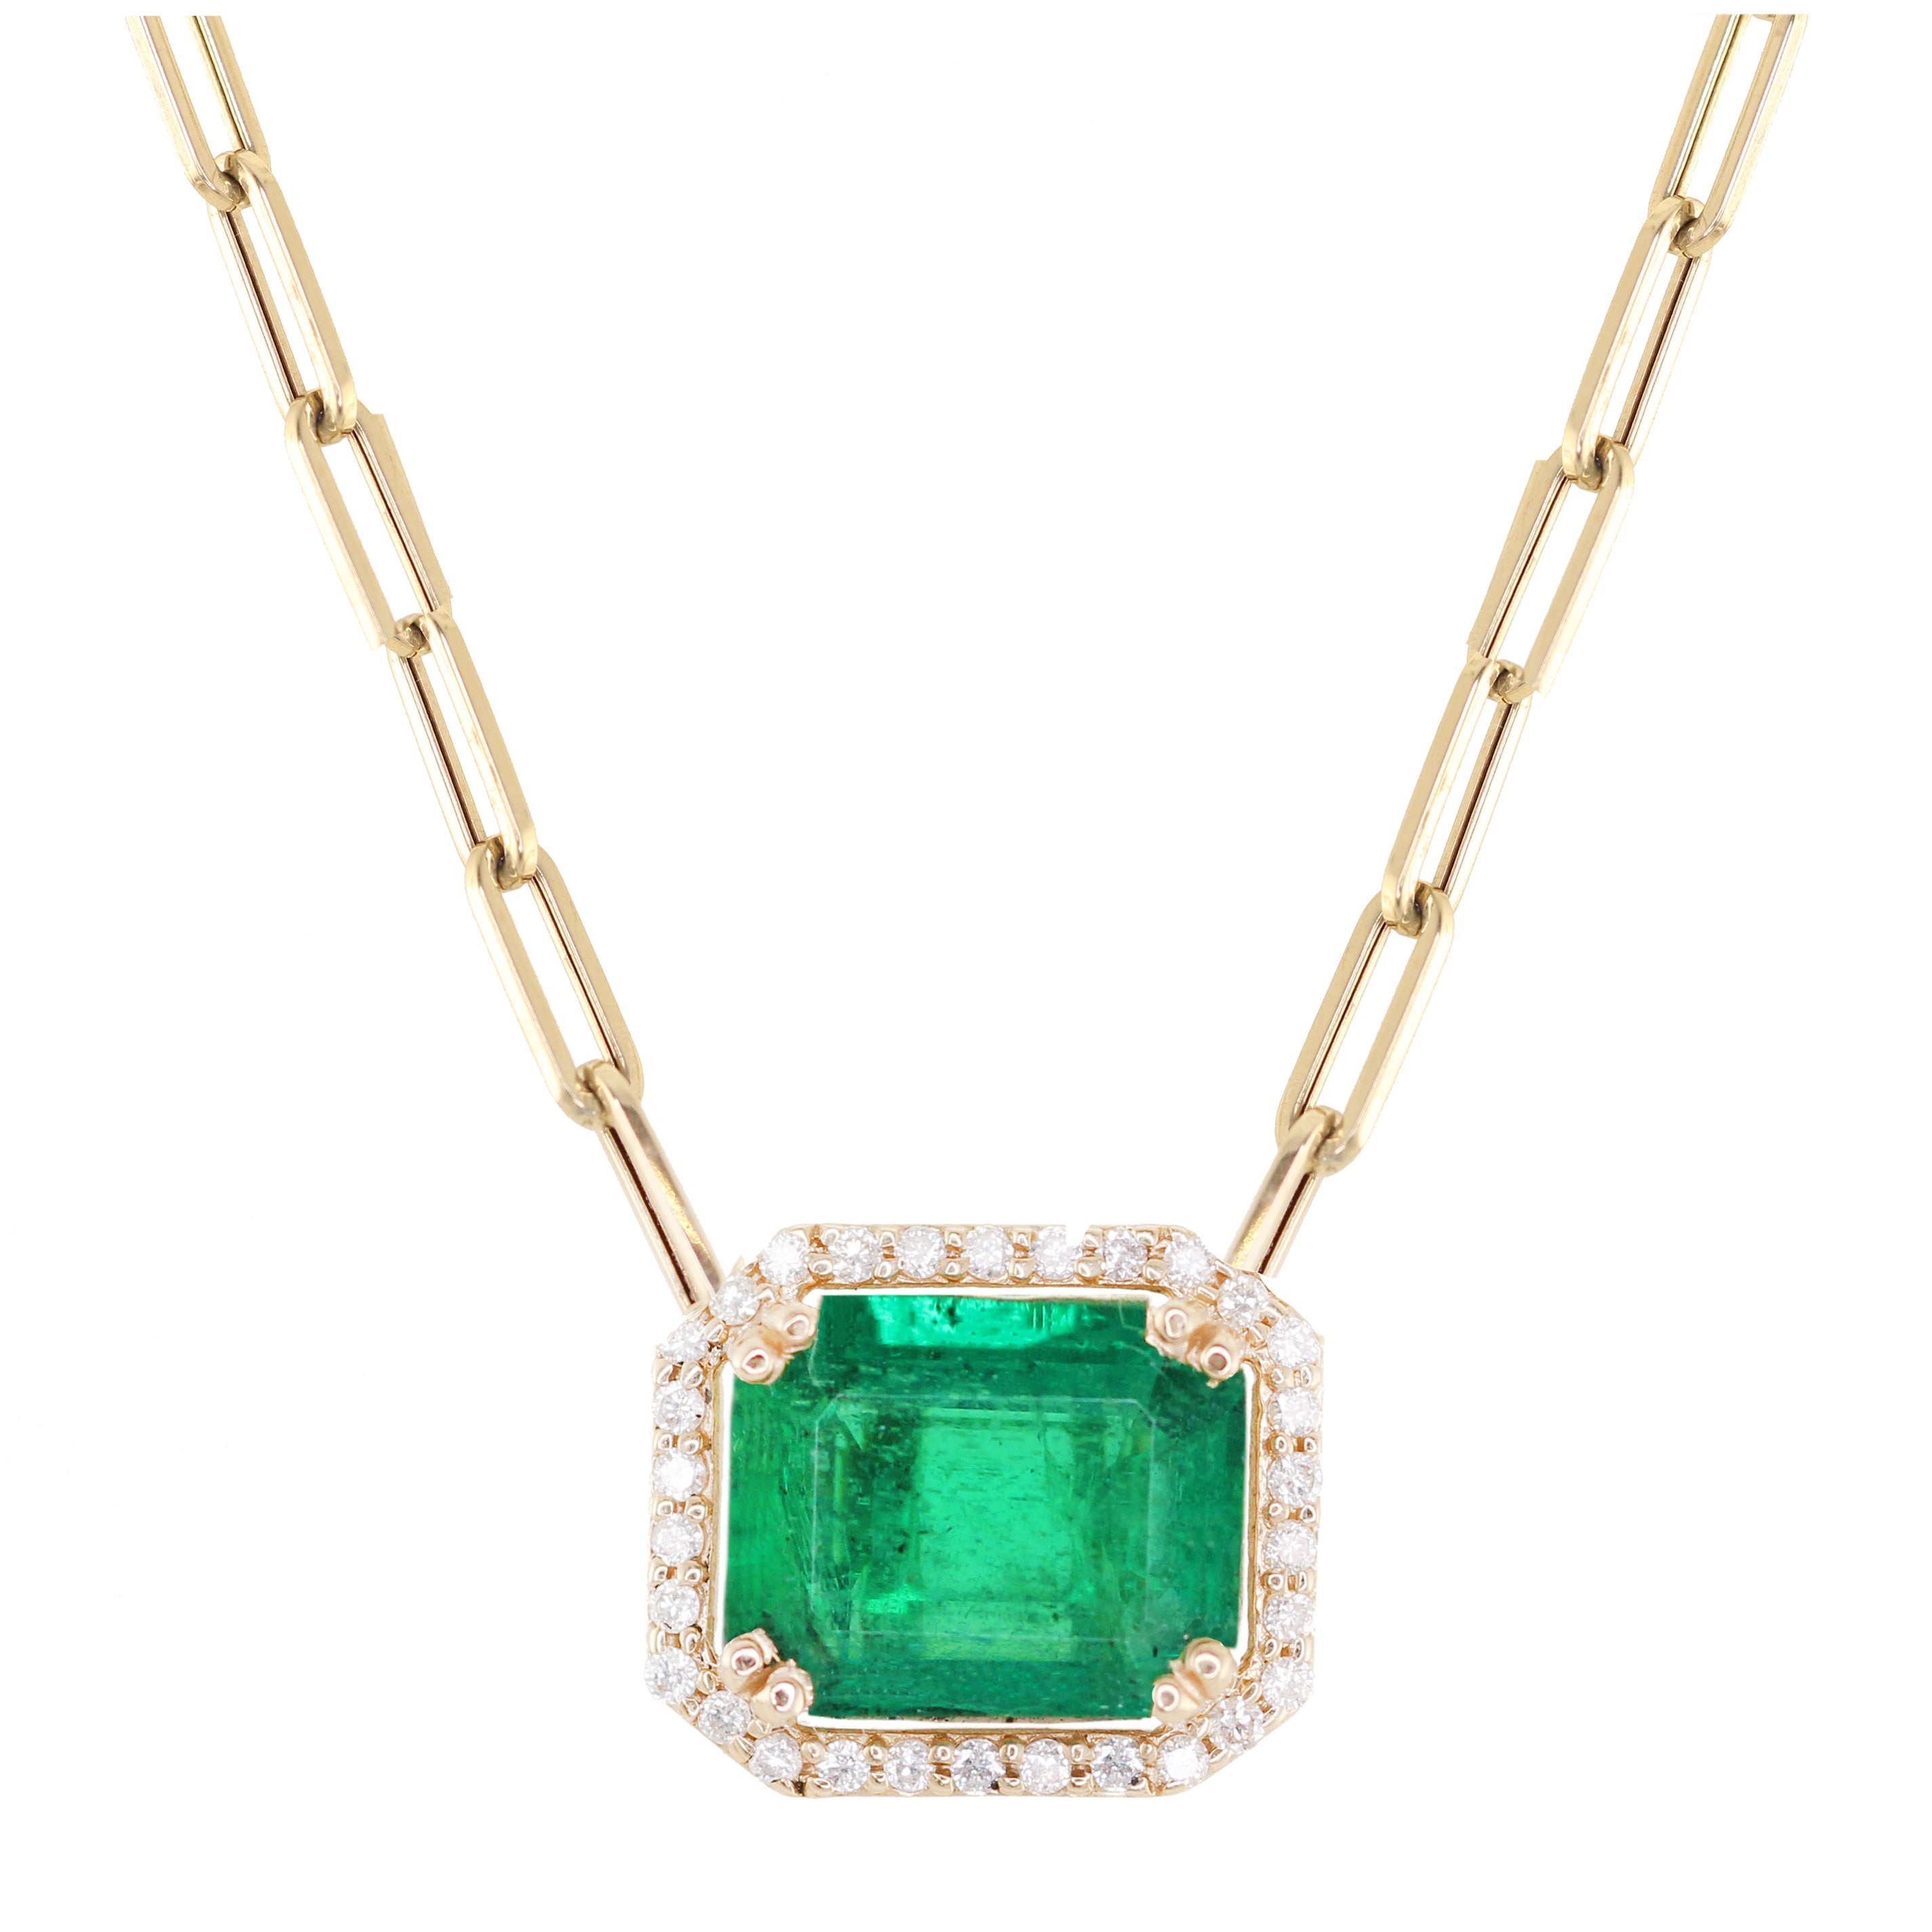 18ct Yellow Gold & Square Emerald Necklace - Nicholas Wylde